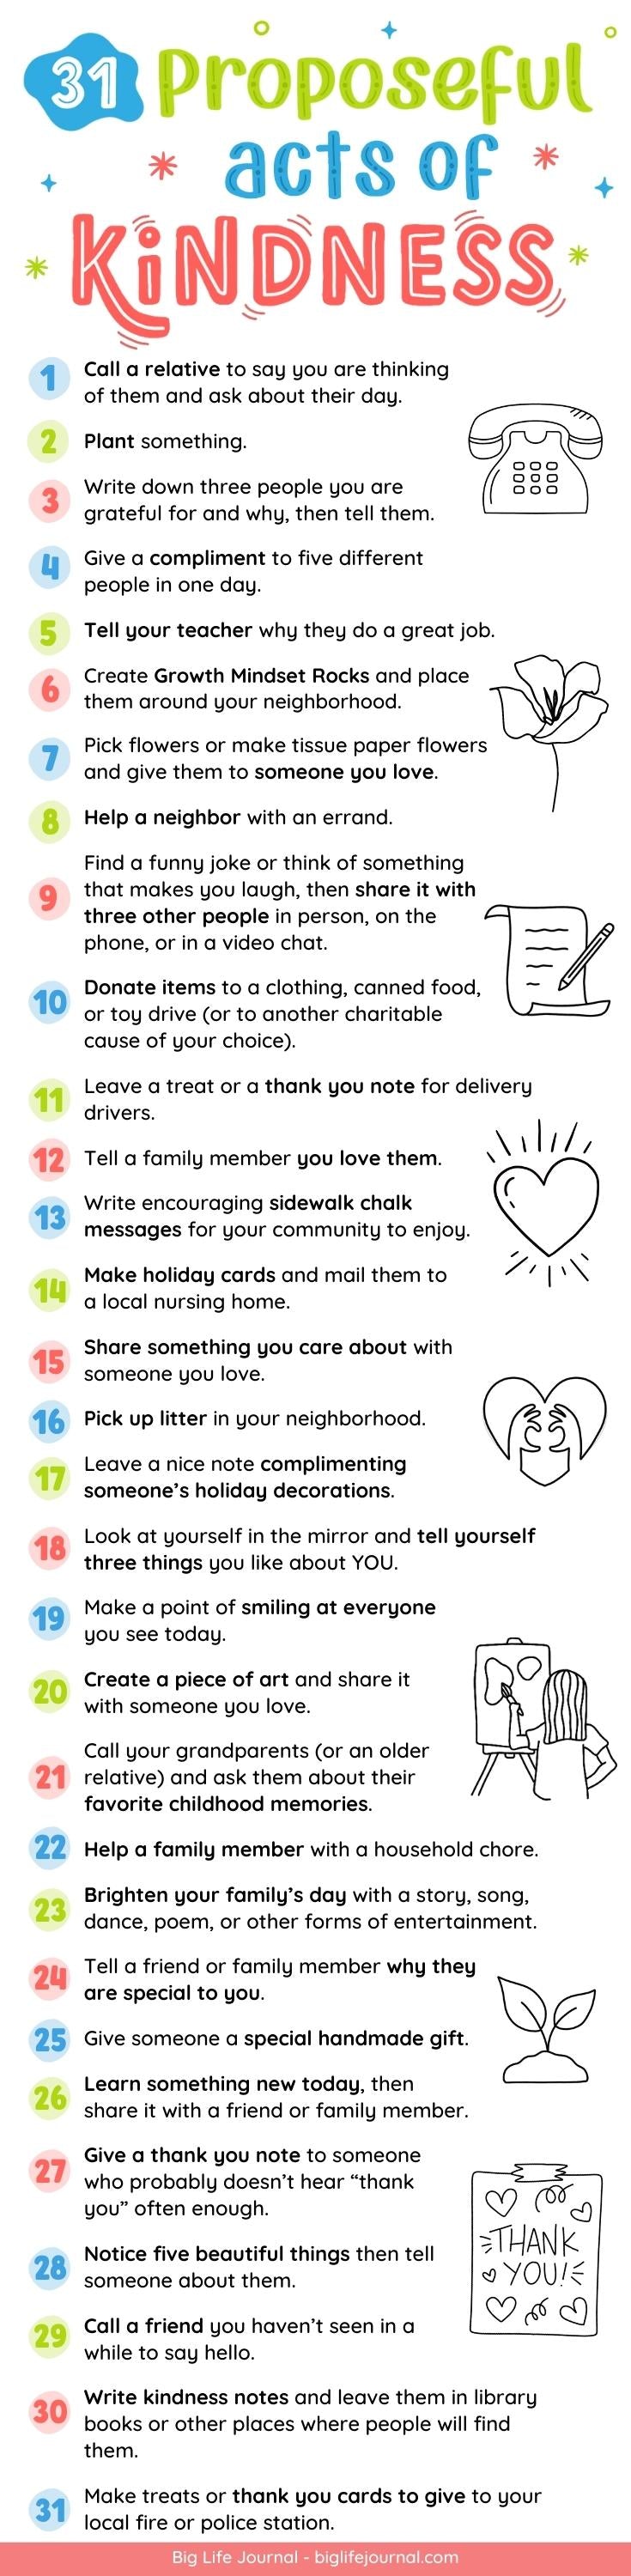 31 Purposeful Acts of Kindness